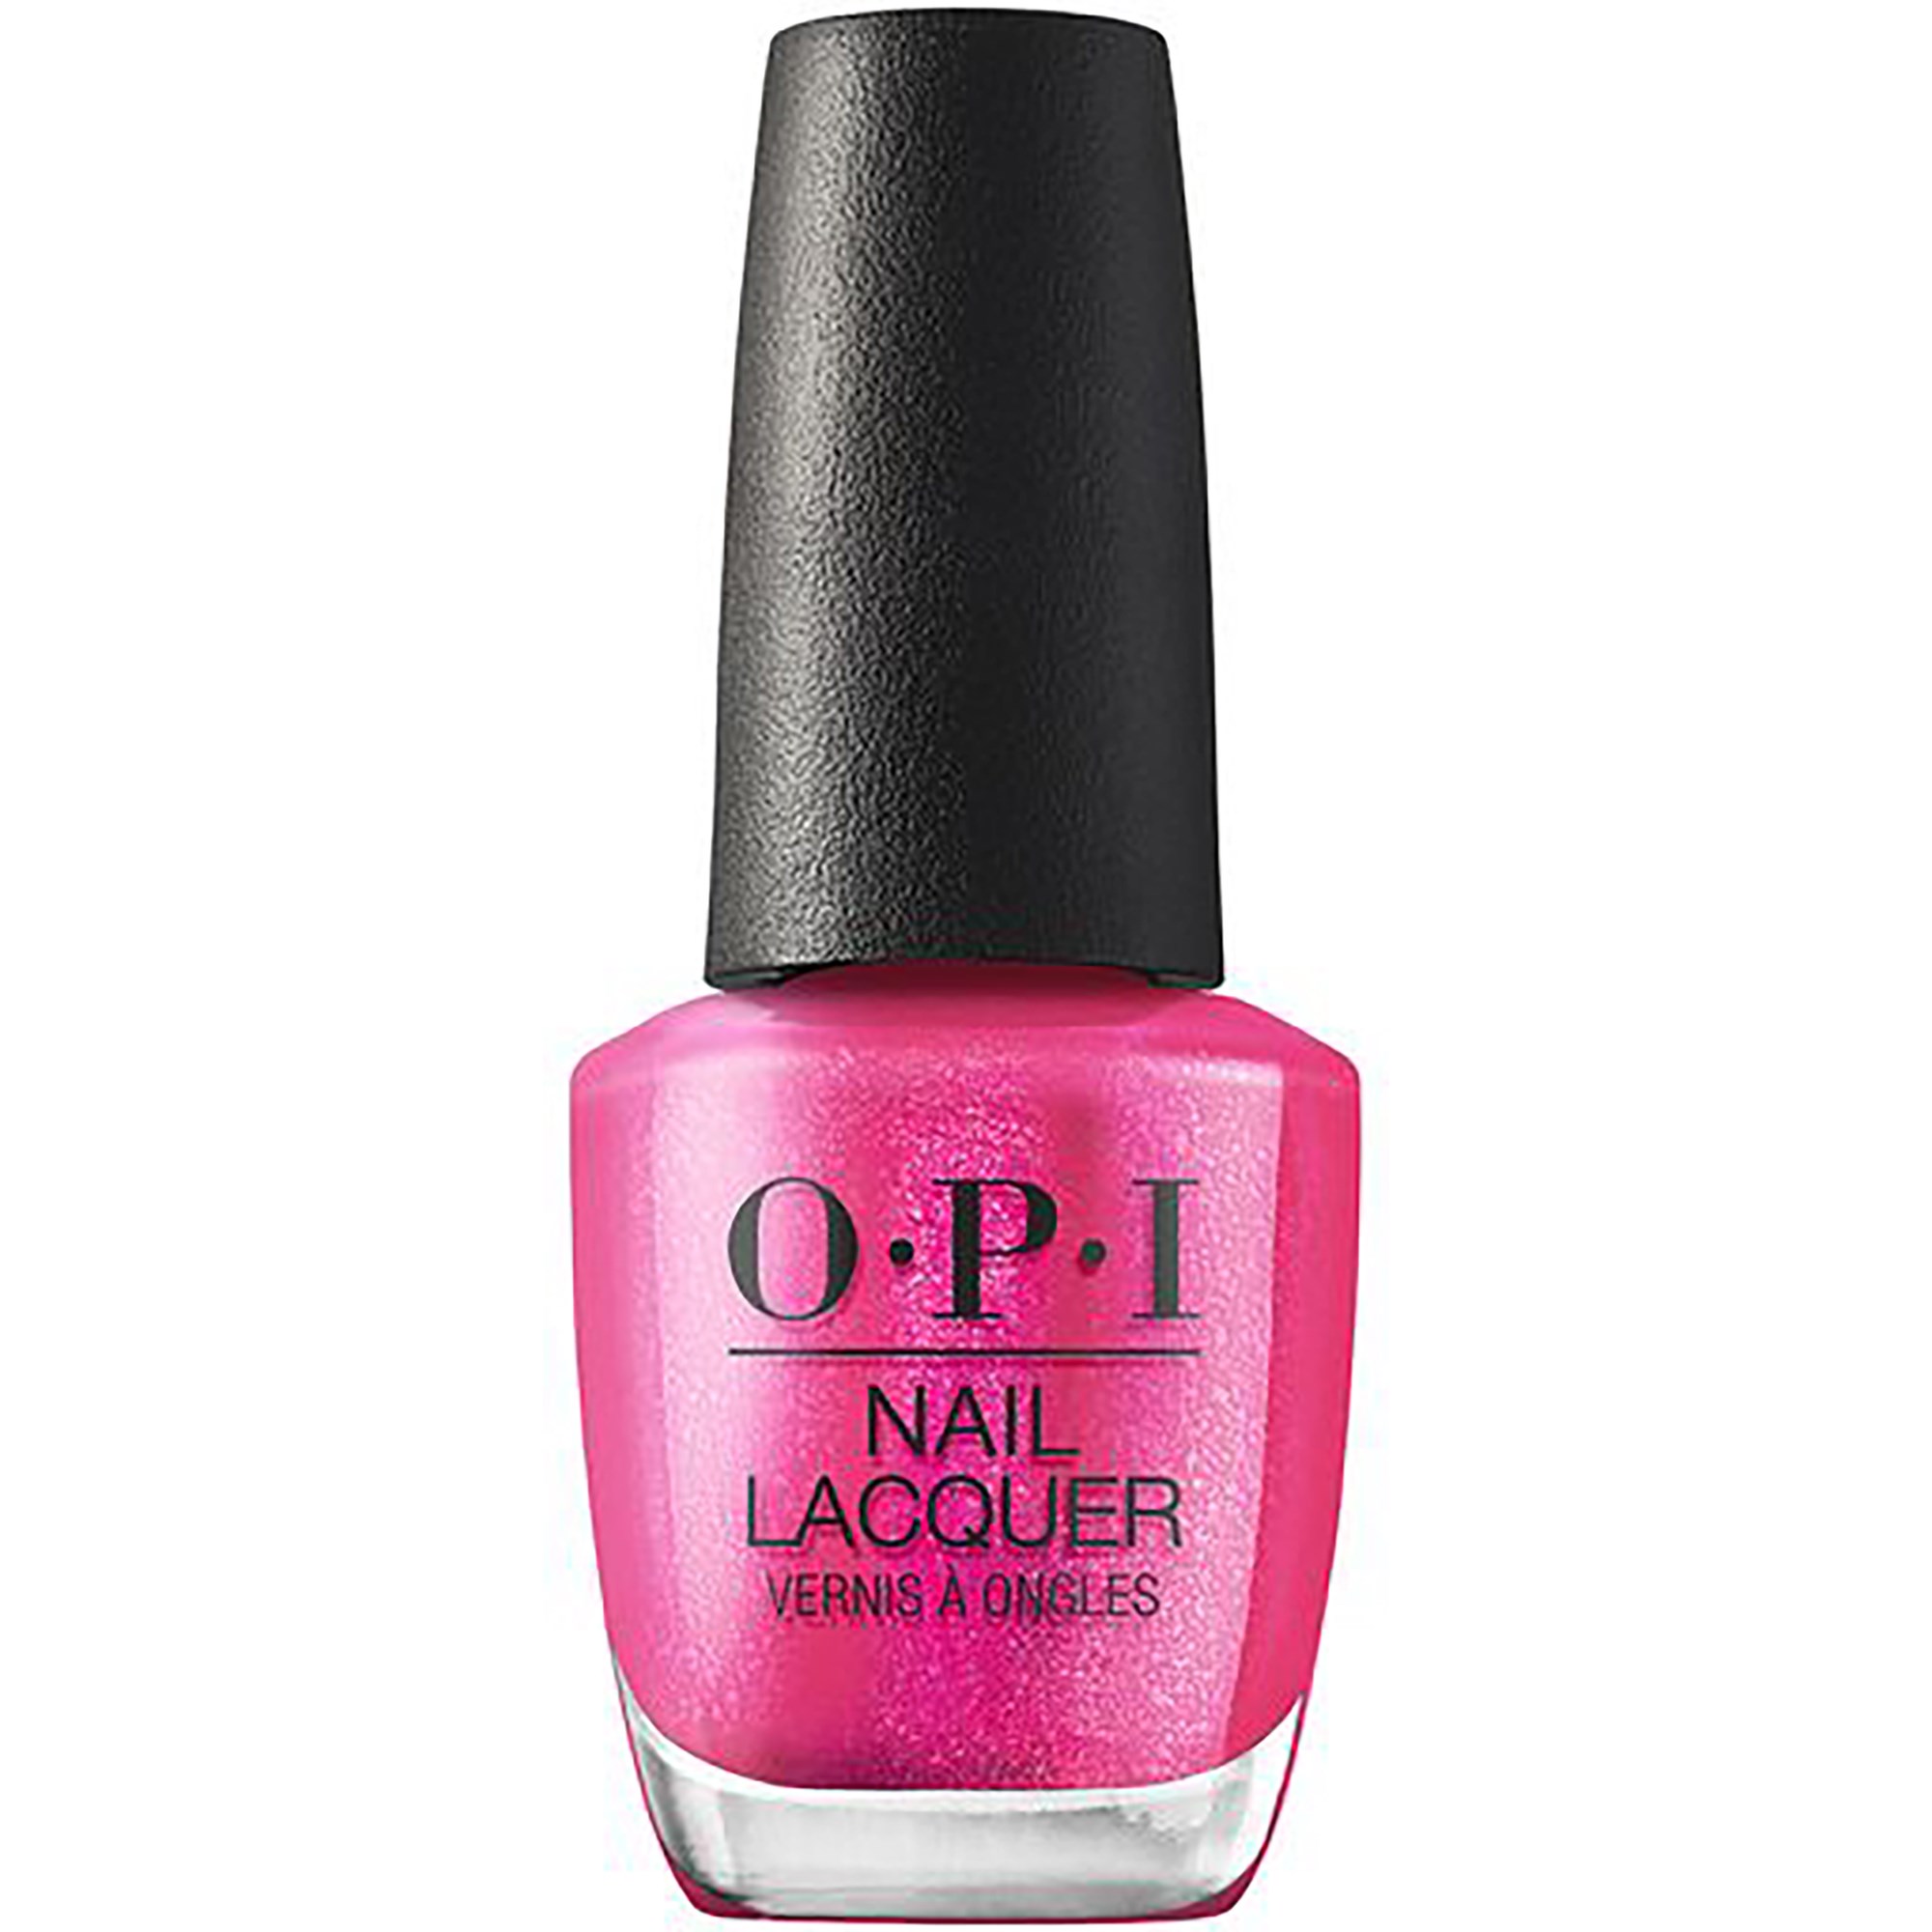 OPI Nail Lacquer Jewel Be Bold Pink, Bling, and Be Merry